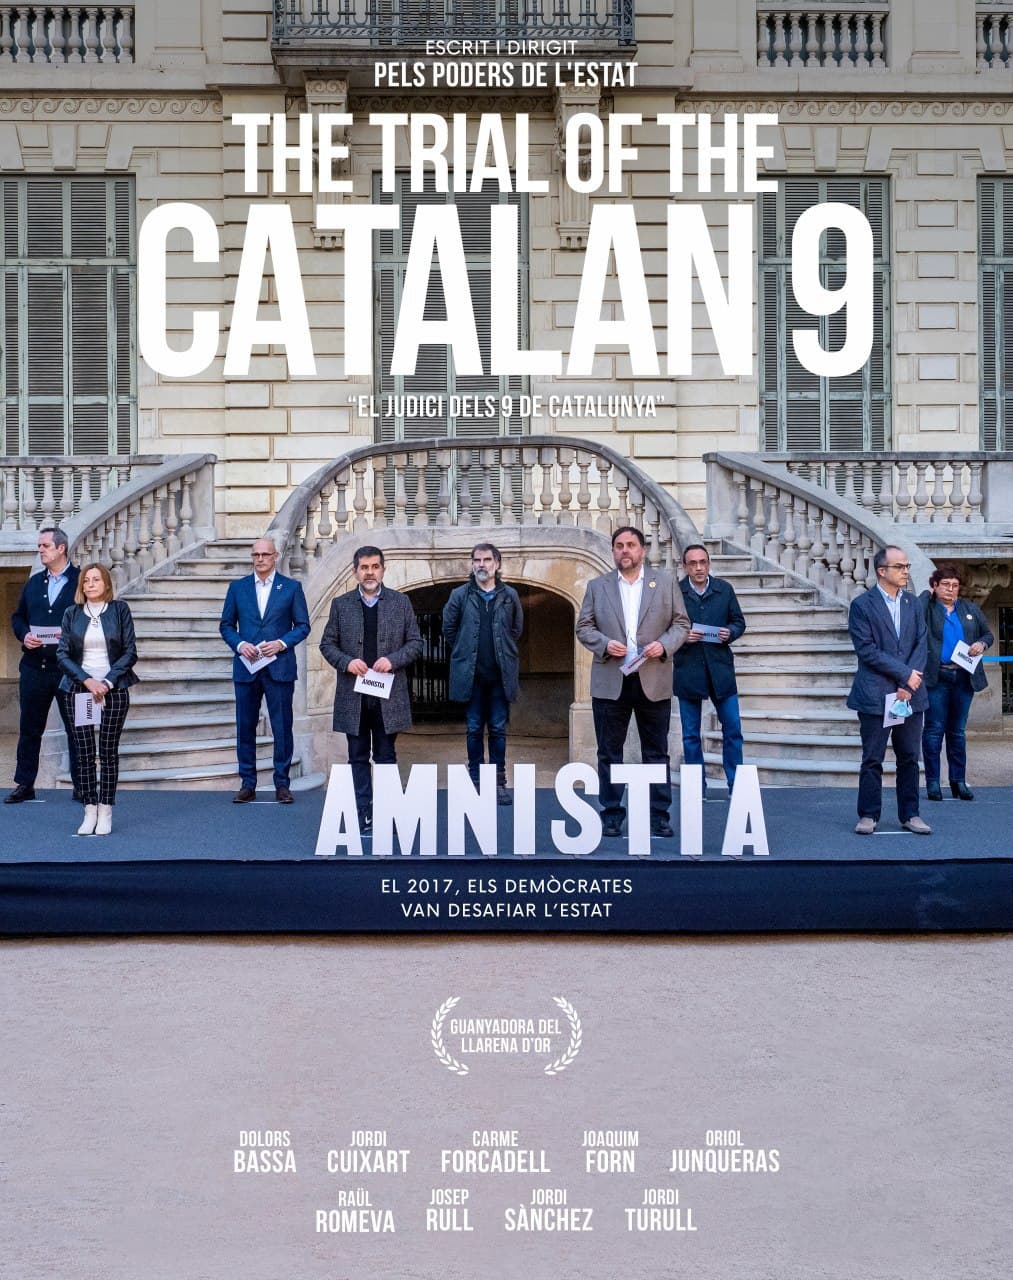 The Trial of the Catalan 9